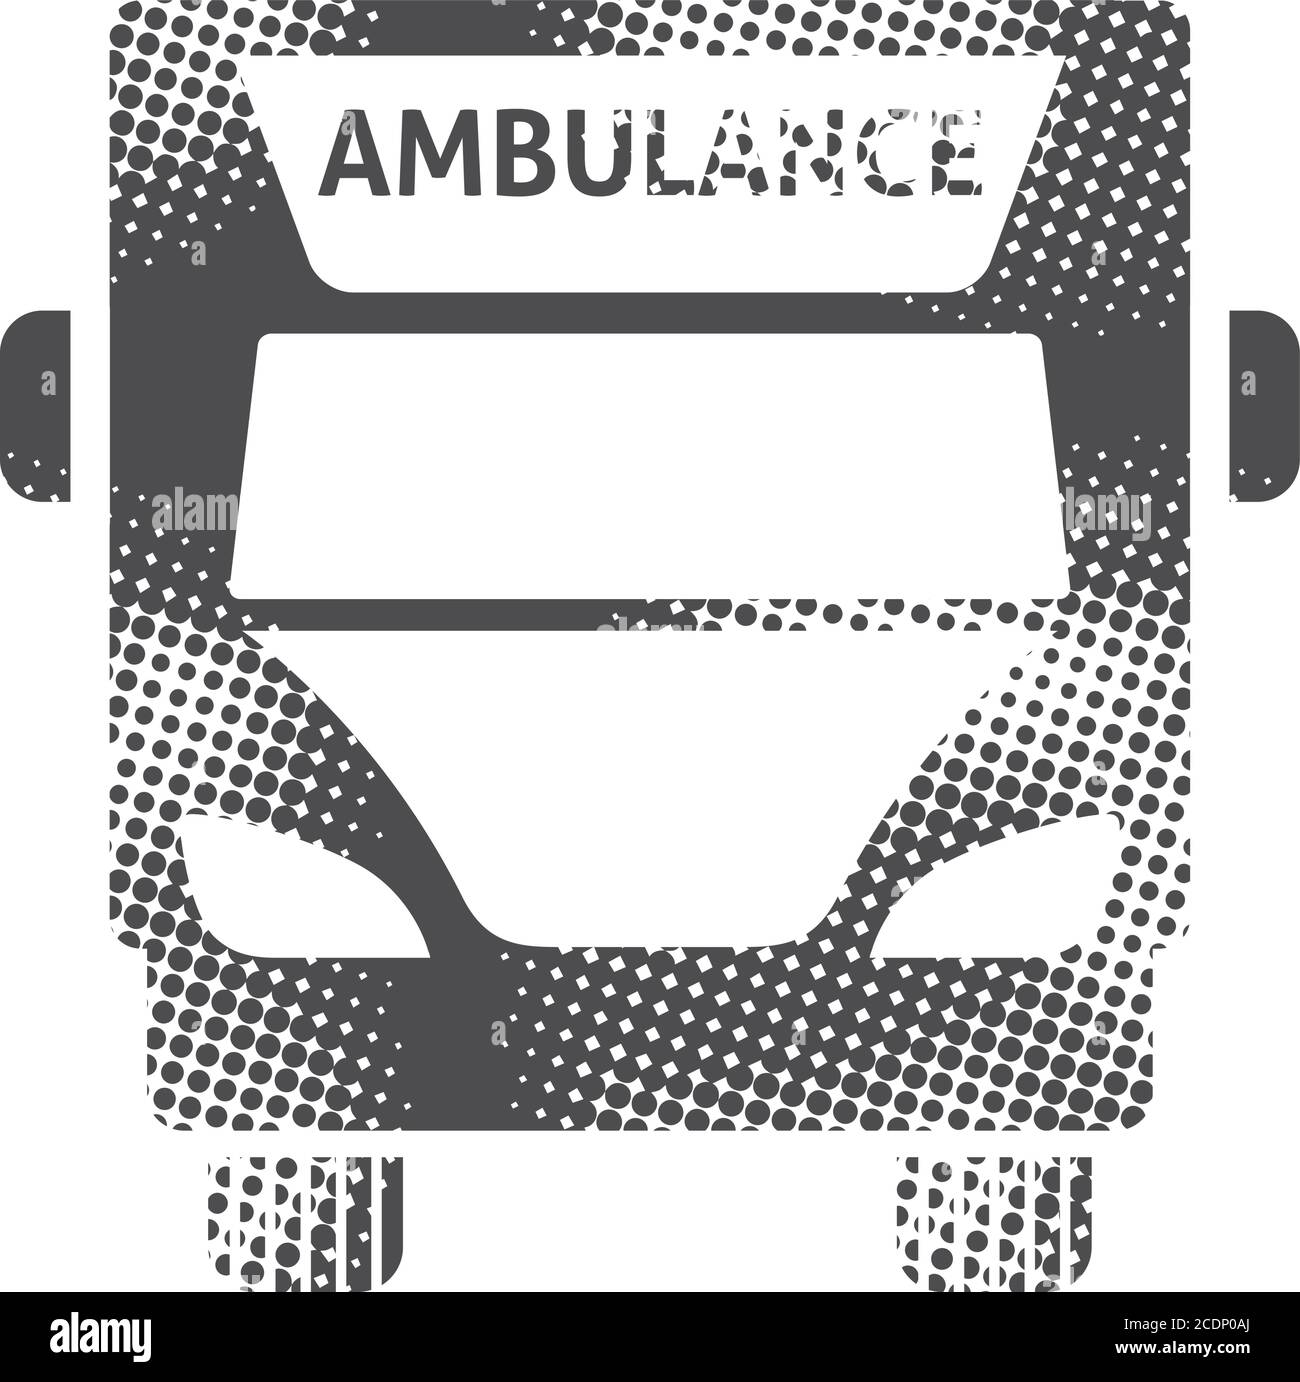 Ambulance icon in halftone style. Black and white monochrome vector illustration. Stock Vector